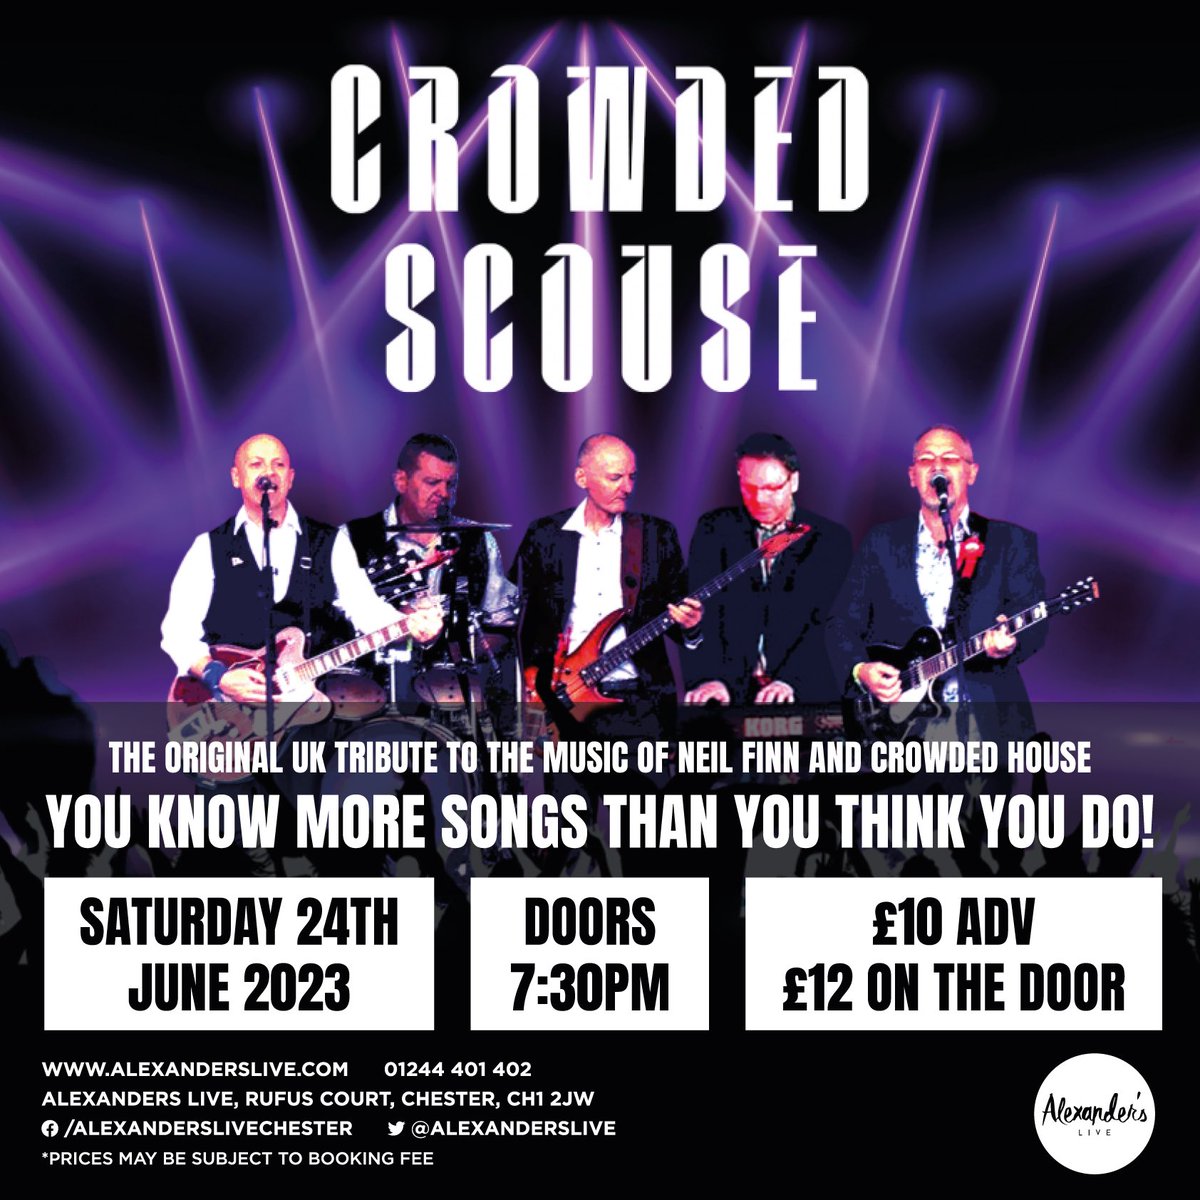 Let’s hope @CrowdedScouse “bring the weather with them” when they come to perform for us this Saturday 24th June. ☀️☀️☀️Get your tickets now - alexanderslive.com @ShitChester @welovegoodtimes @chestertweetsuk @chesterdotcom @Dee1063 @CH1independents @visit_chester…